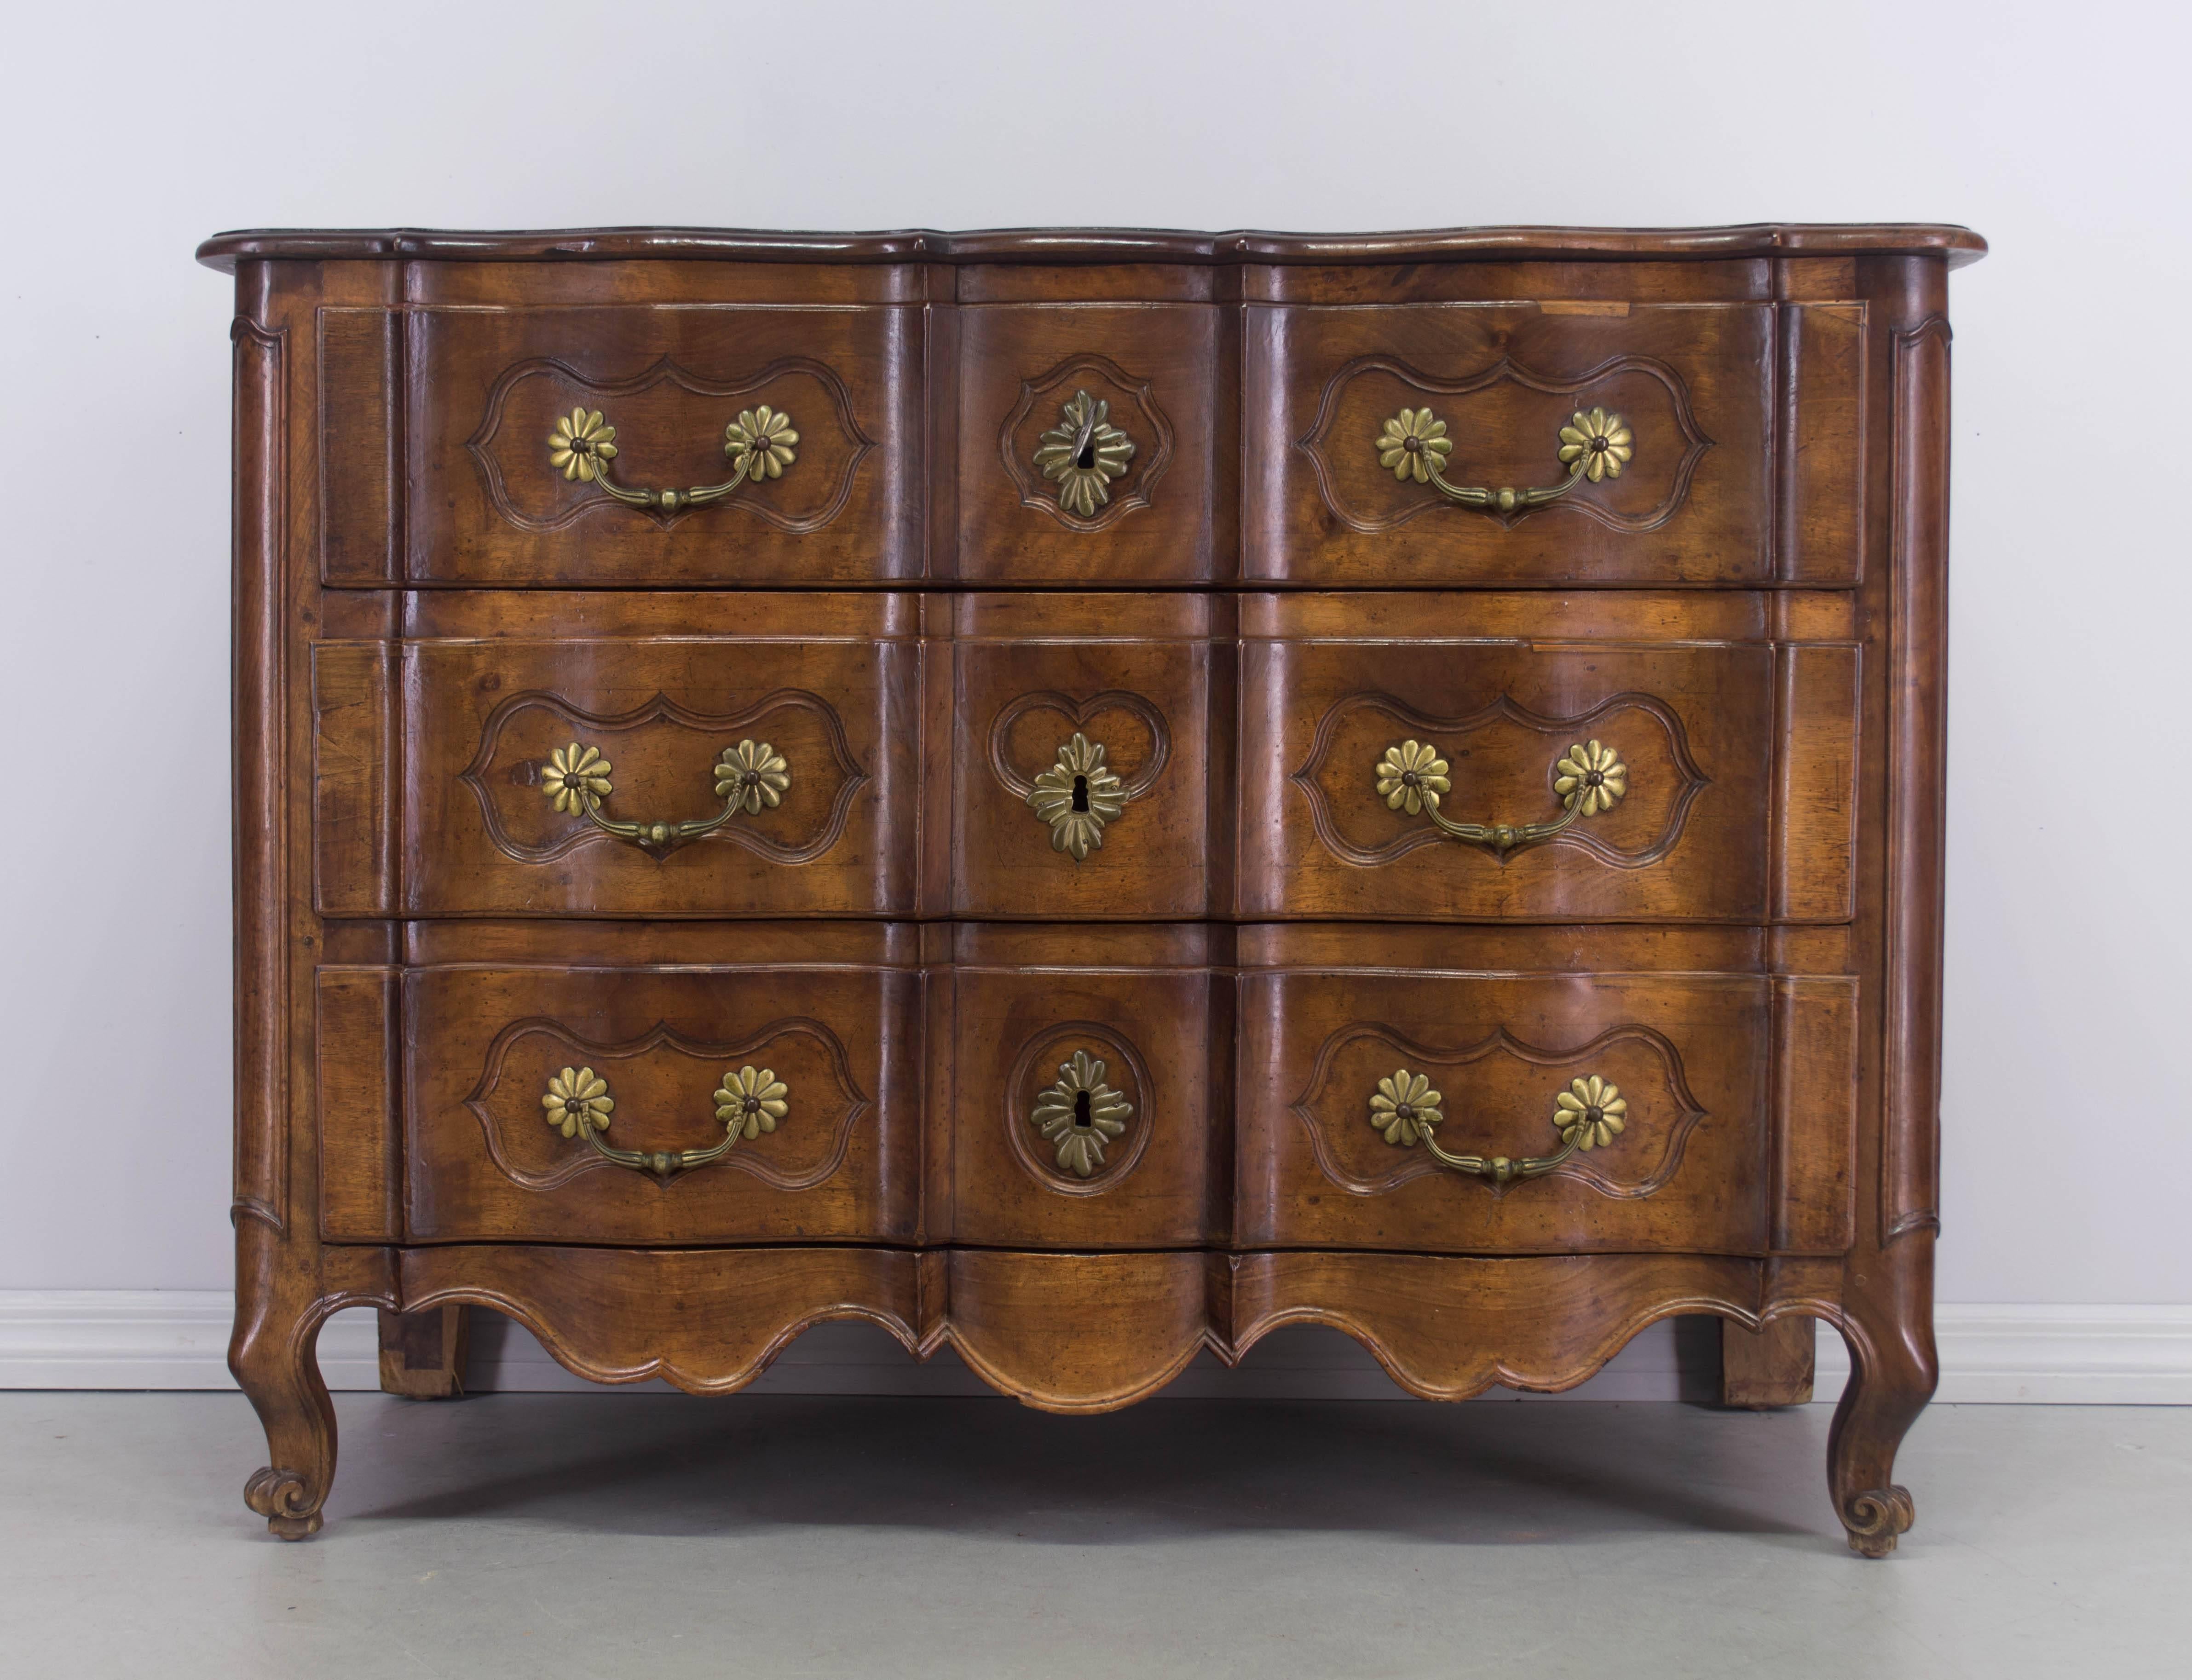 18th century French Louis XV commode or chest of drawers, made of solid walnut with an arbalette (crossbow) front. Raised panels on the sides and curved front corners. Three dovetailed drawers with original bronze pulls. Locks in working order with